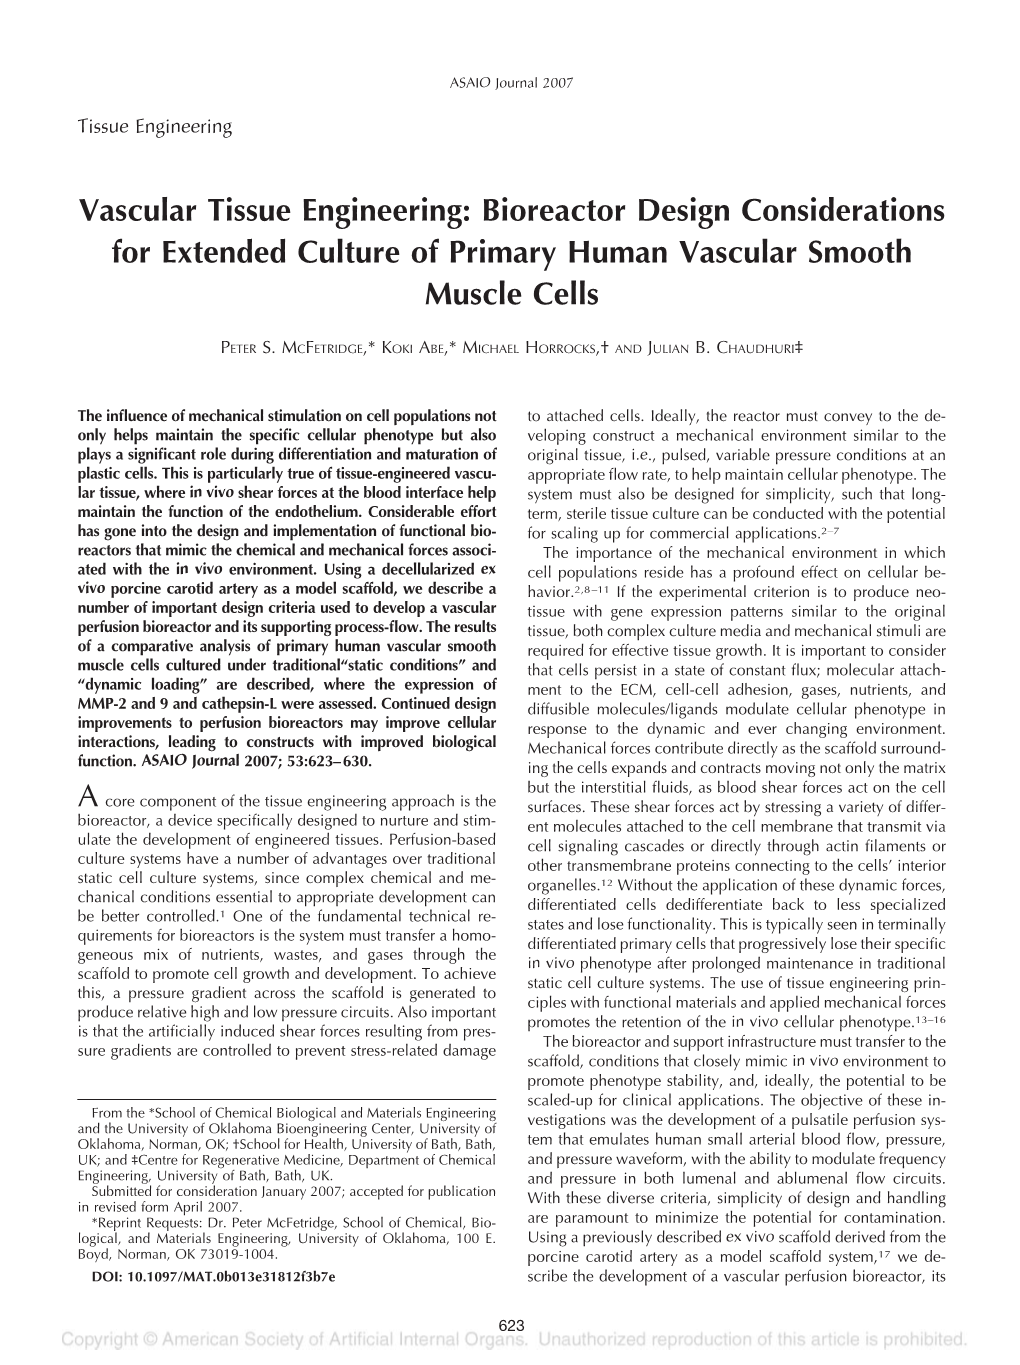 Vascular Tissue Engineering: Bioreactor Design Considerations for Extended Culture of Primary Human Vascular Smooth Muscle Cells